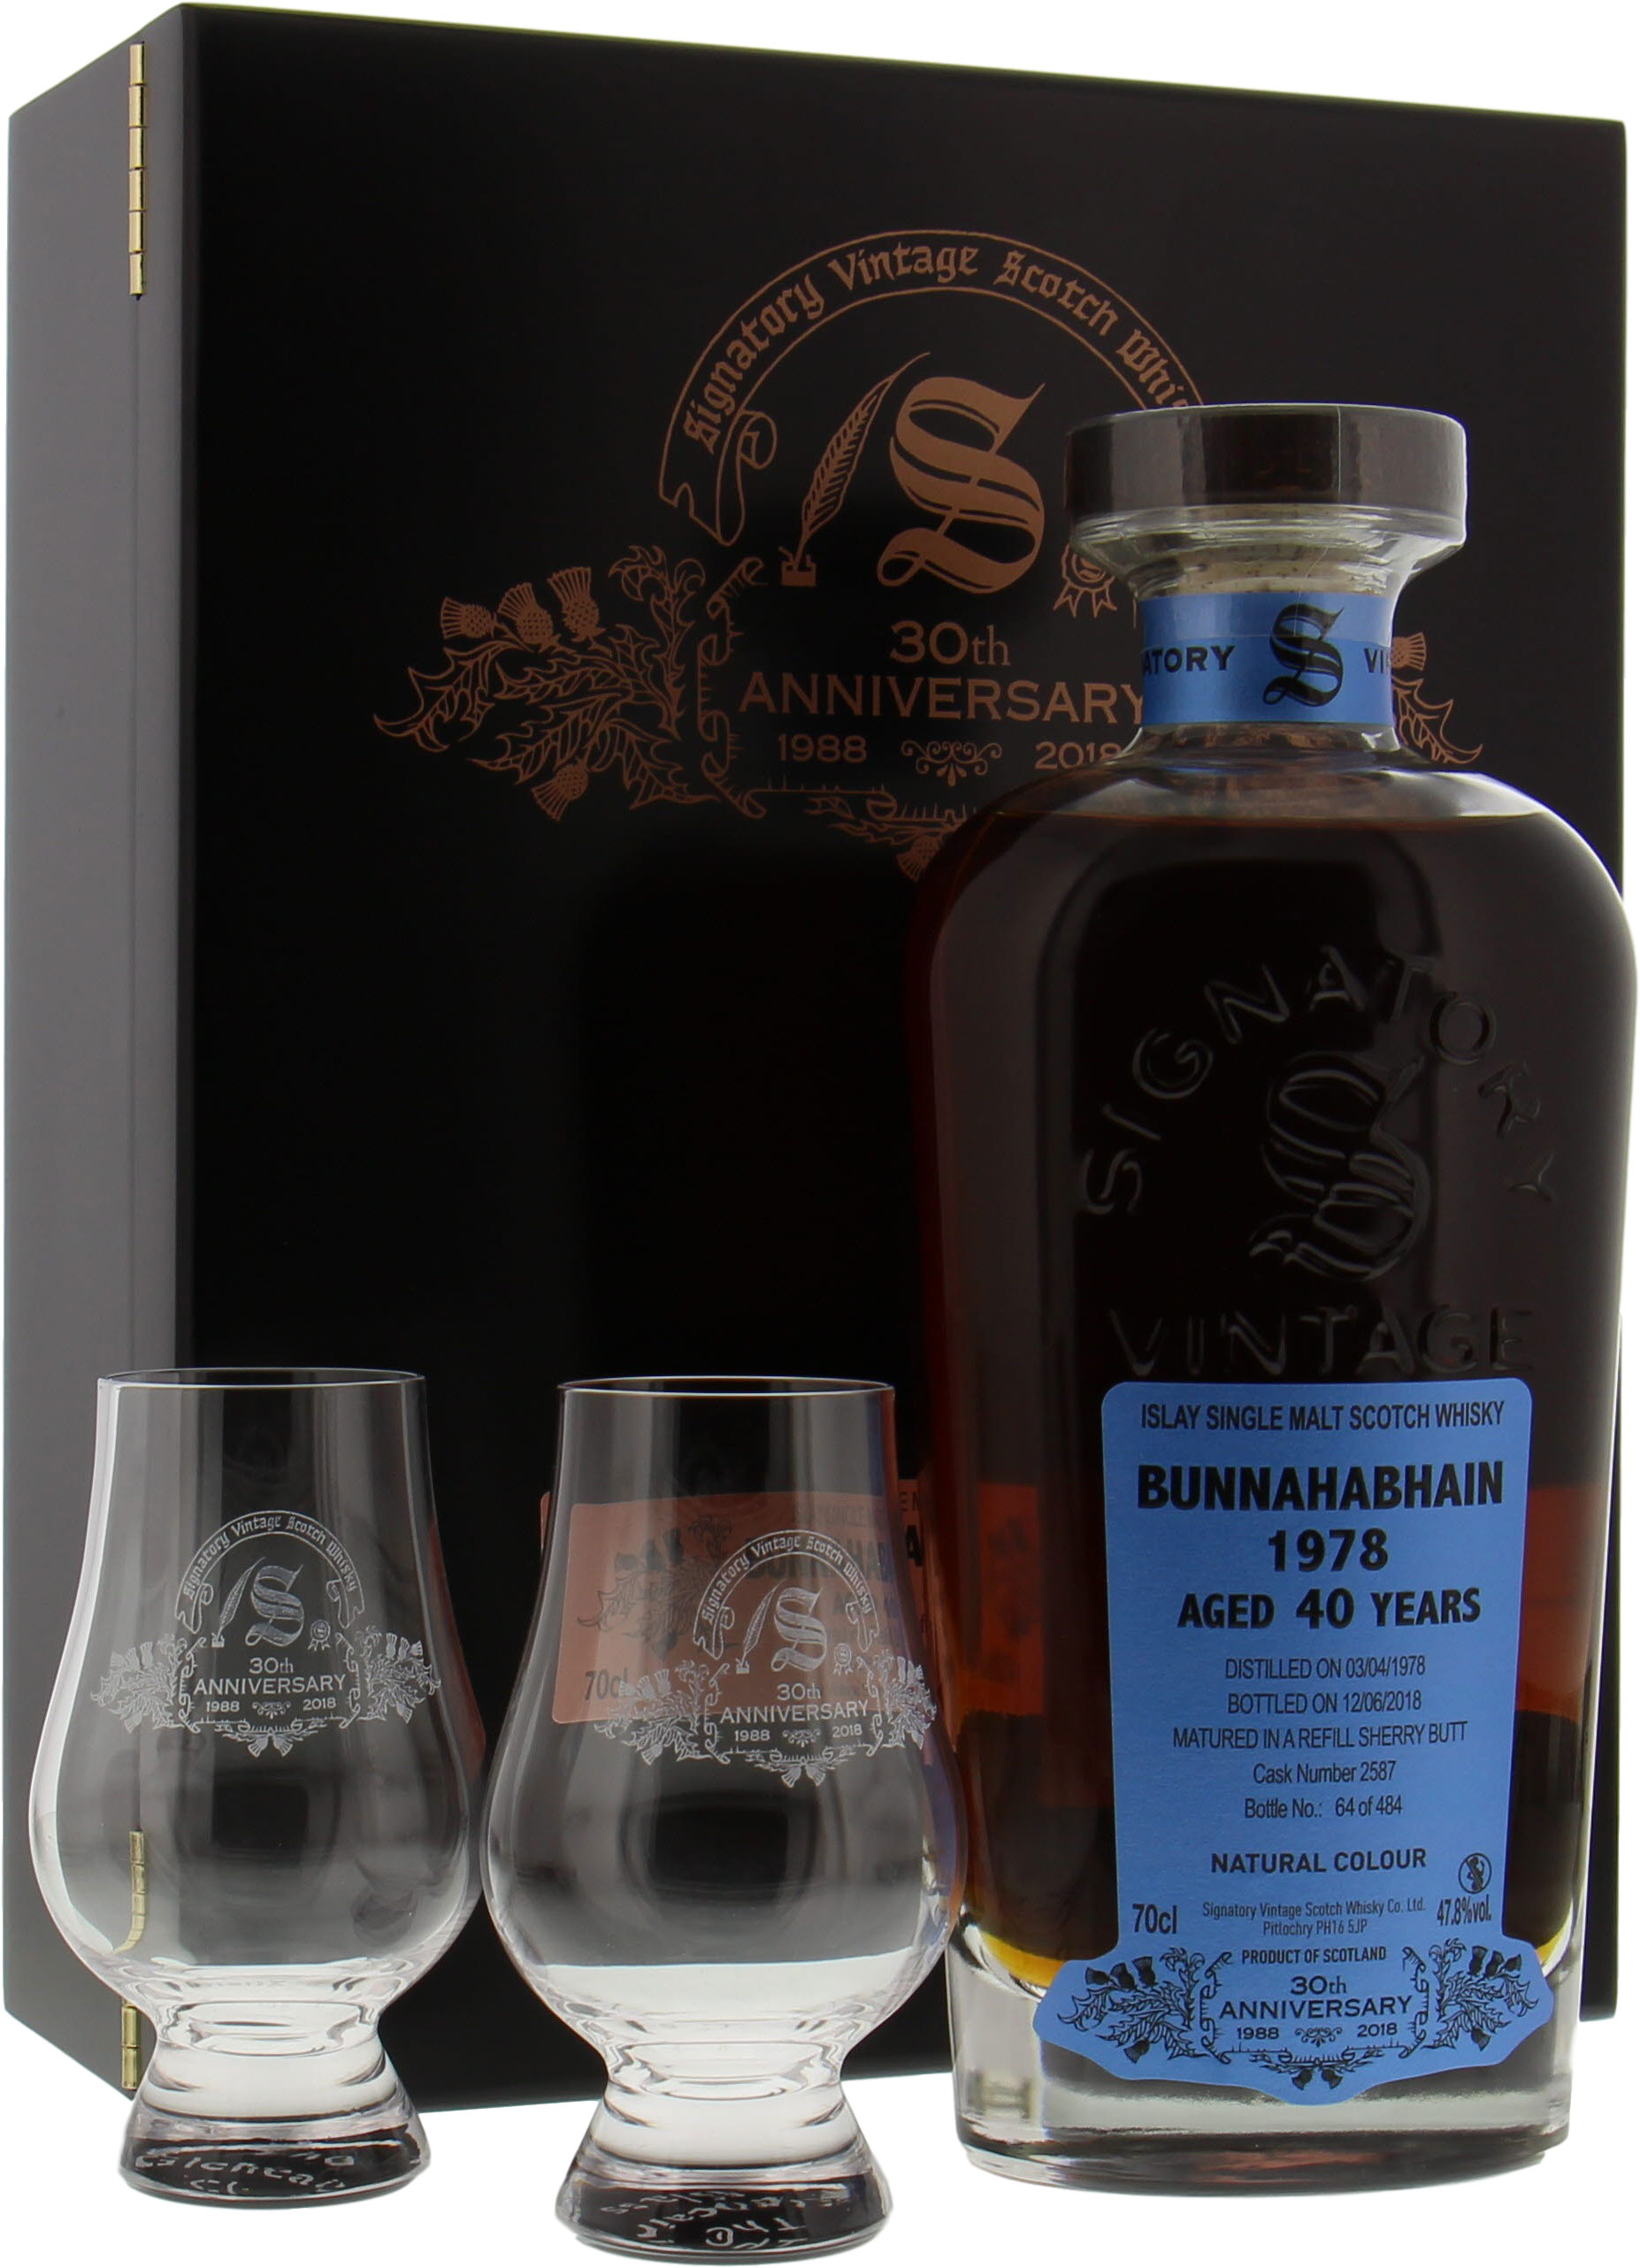 Bunnahabhain - 40 Years Old Signatory 30th Anniversary Cask 2587 47.8% 1978 In Original Wooden Container